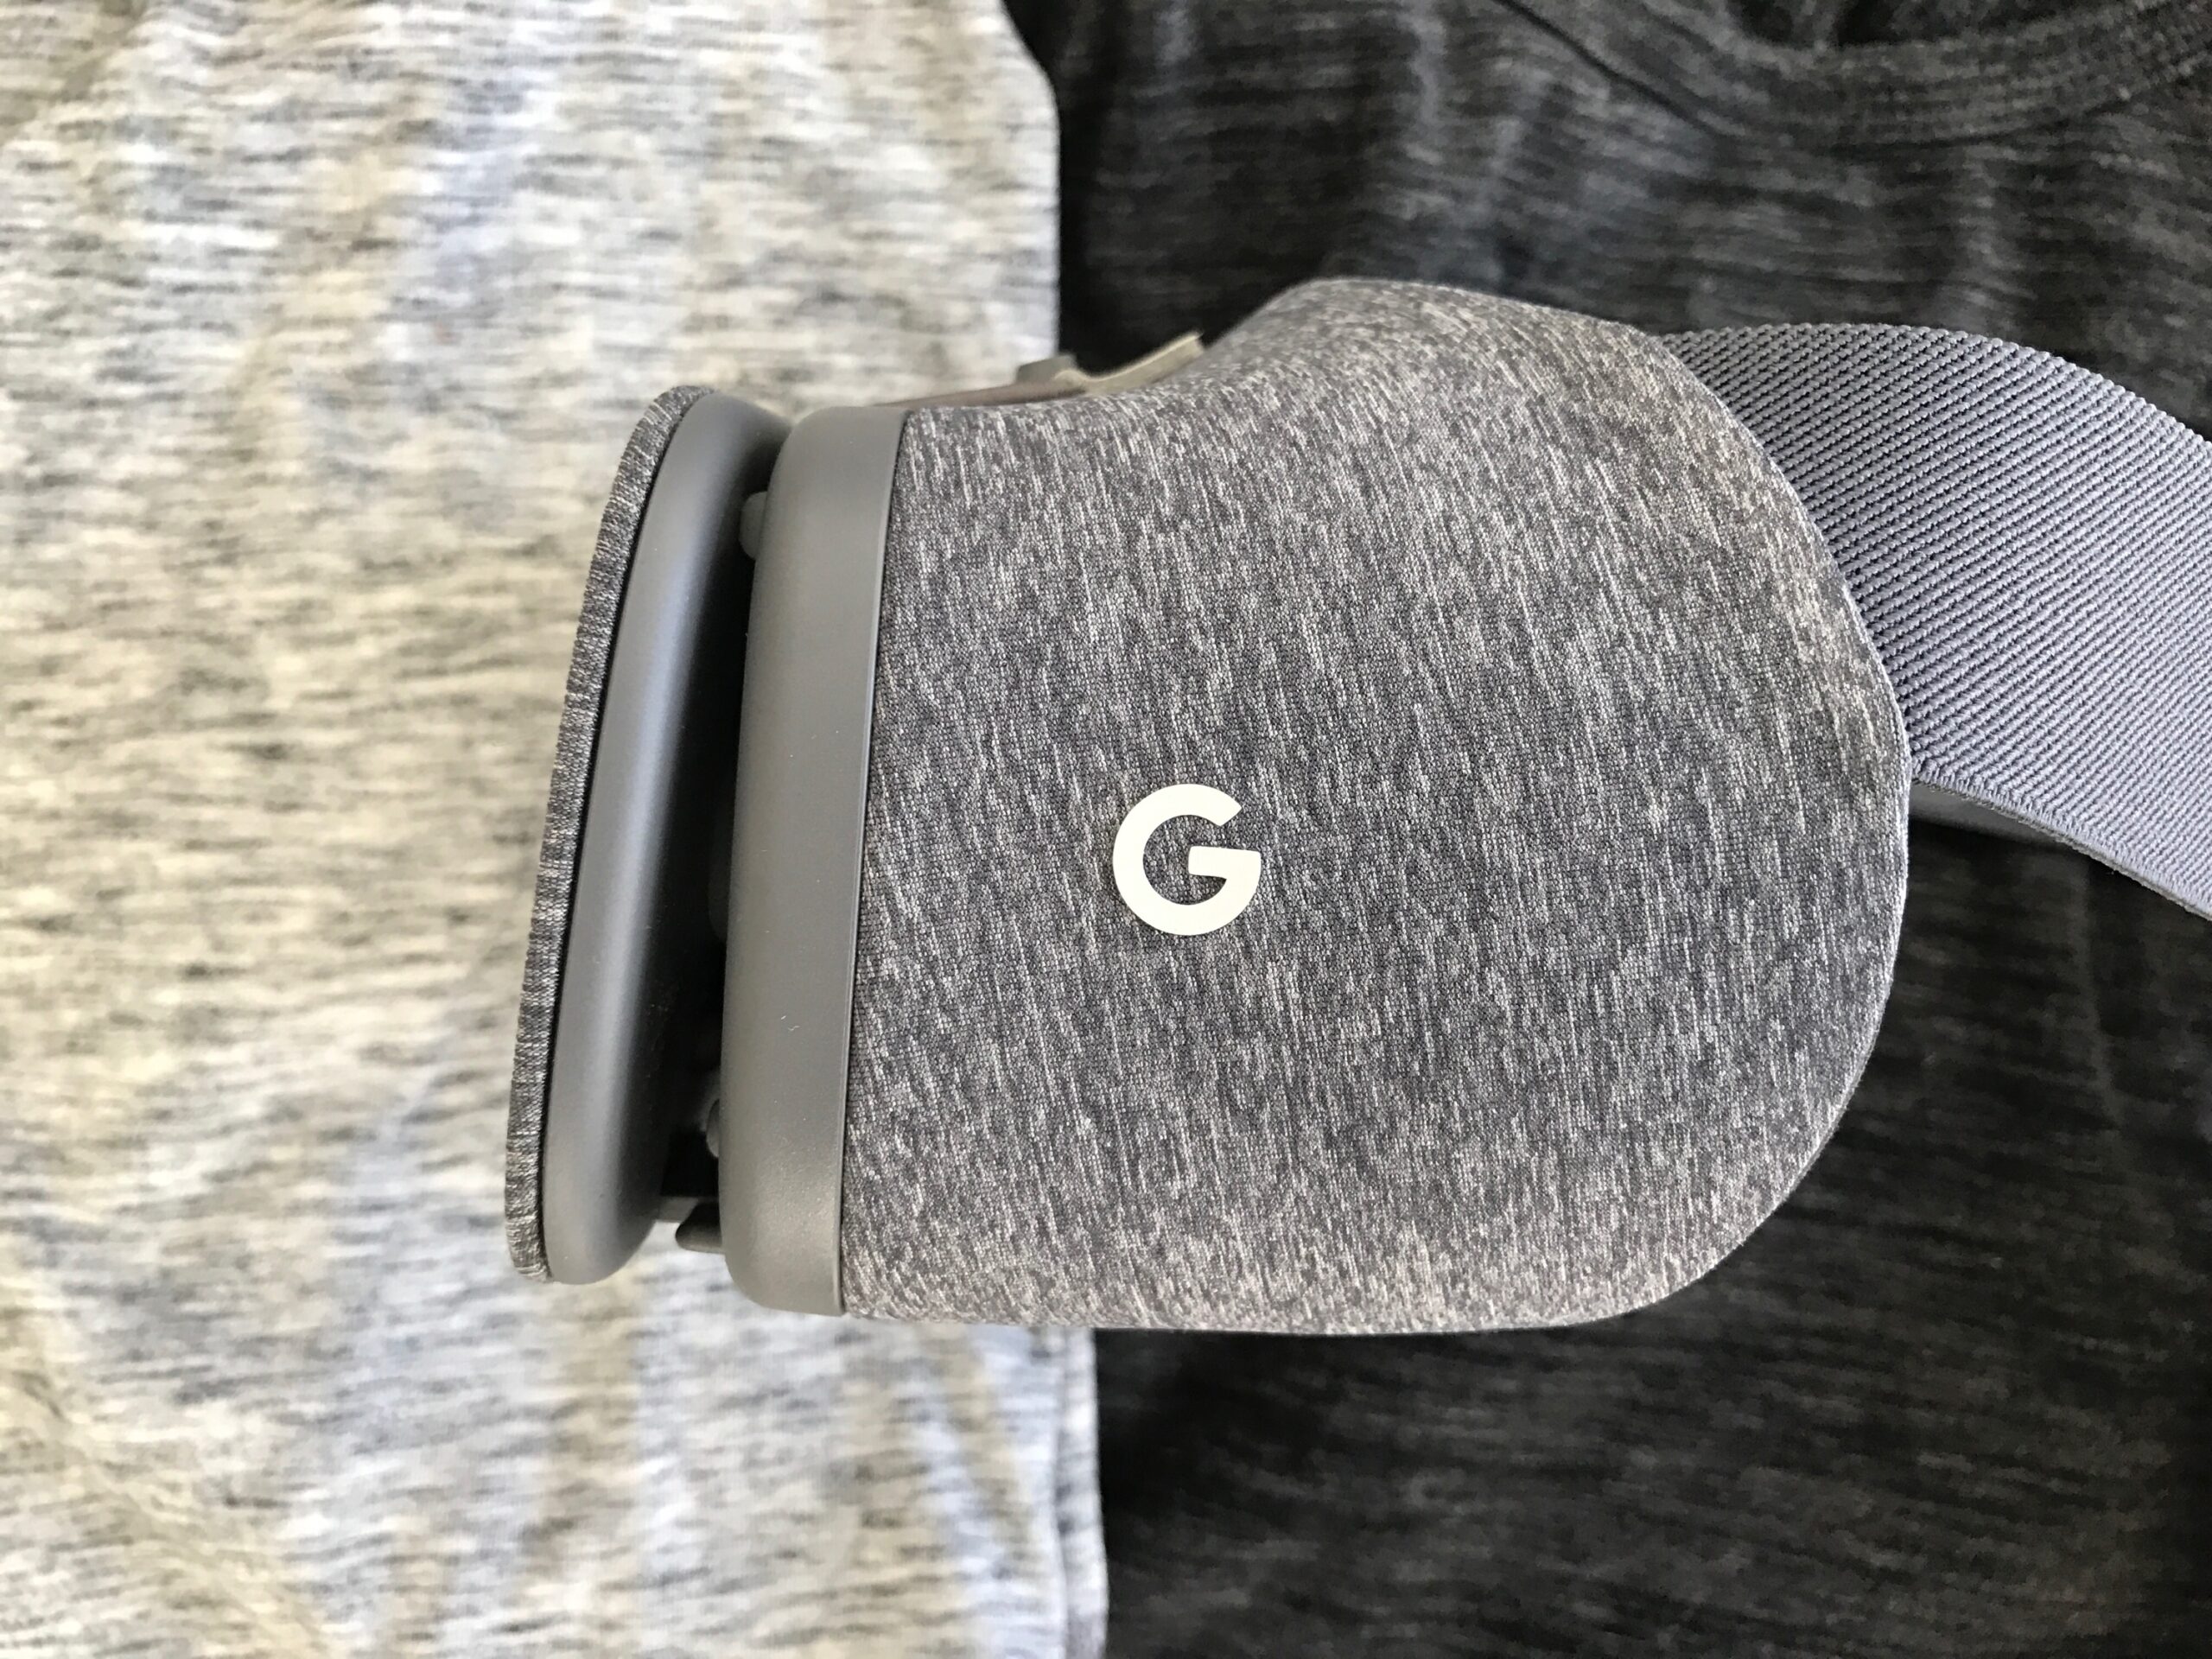 Daydream VR is Google Cardboard for Grown-Ups